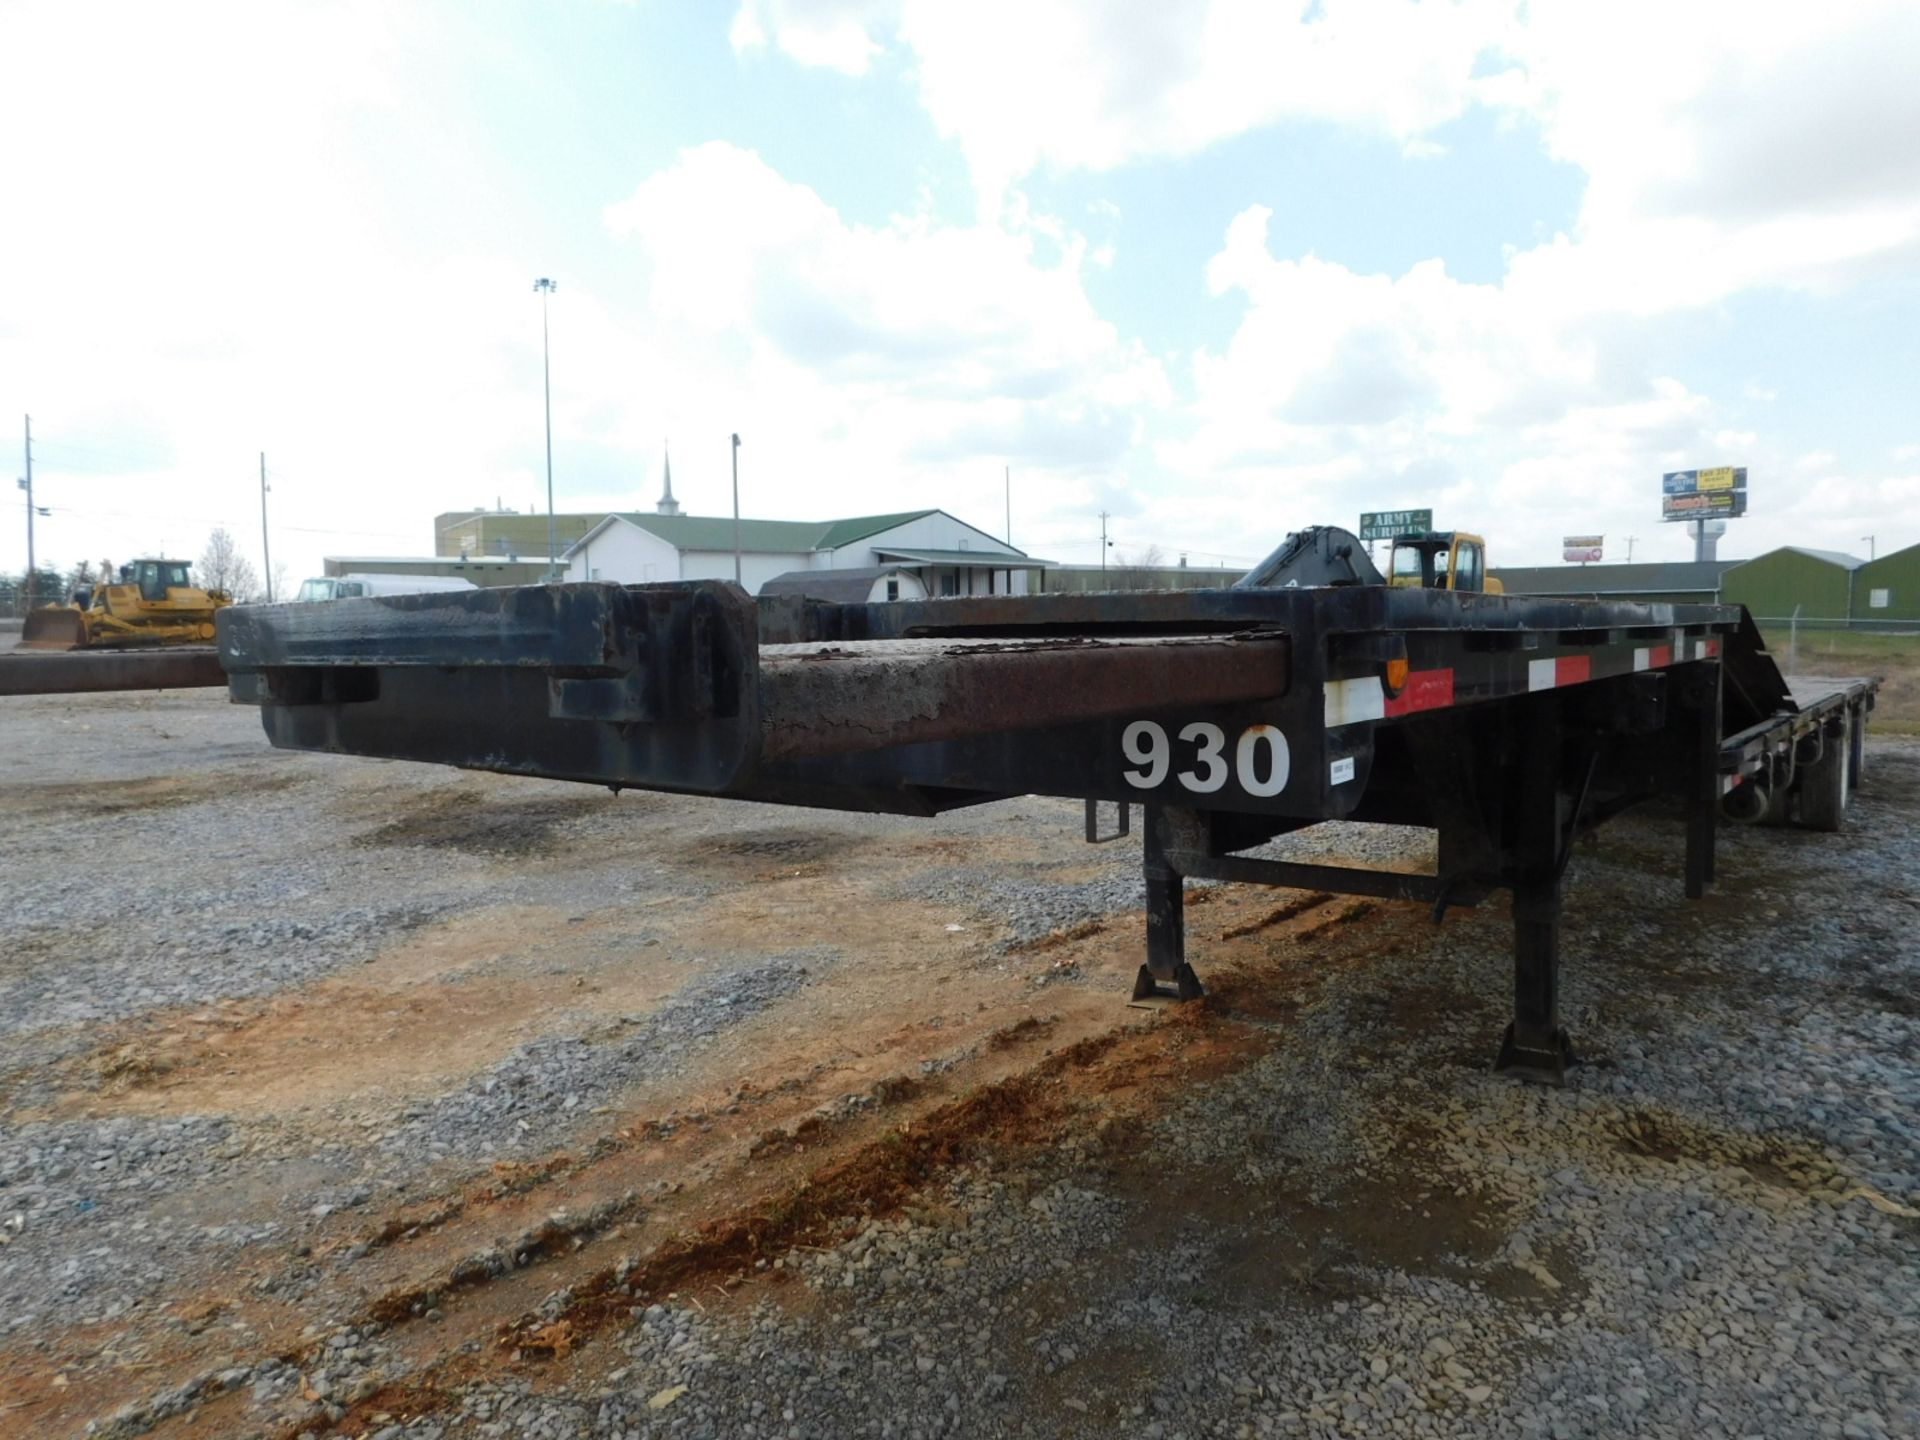 2009 Cherokee Step Deck Spread Axle Trailer, Ramps, Slide Extenders Front & Back, 53' x 102", 25,000 - Image 3 of 8